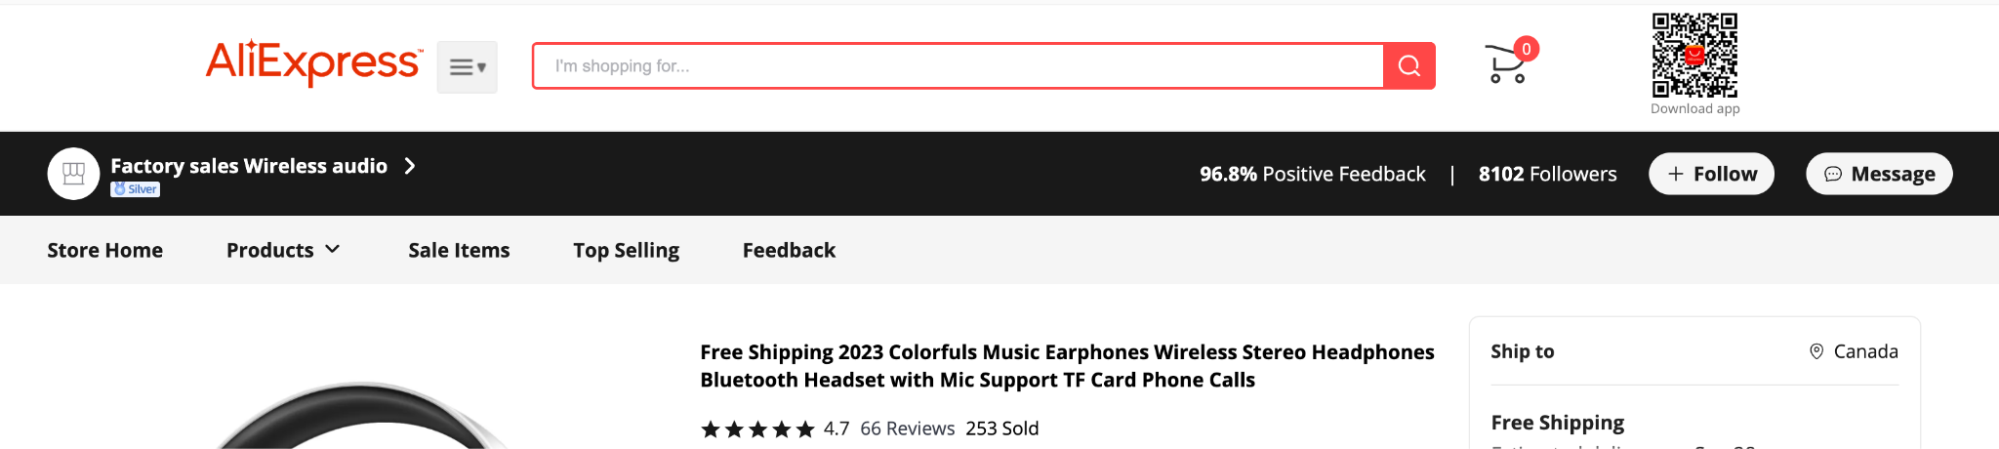 AliExpress search bar above a black banner that contains a seller feedback rating